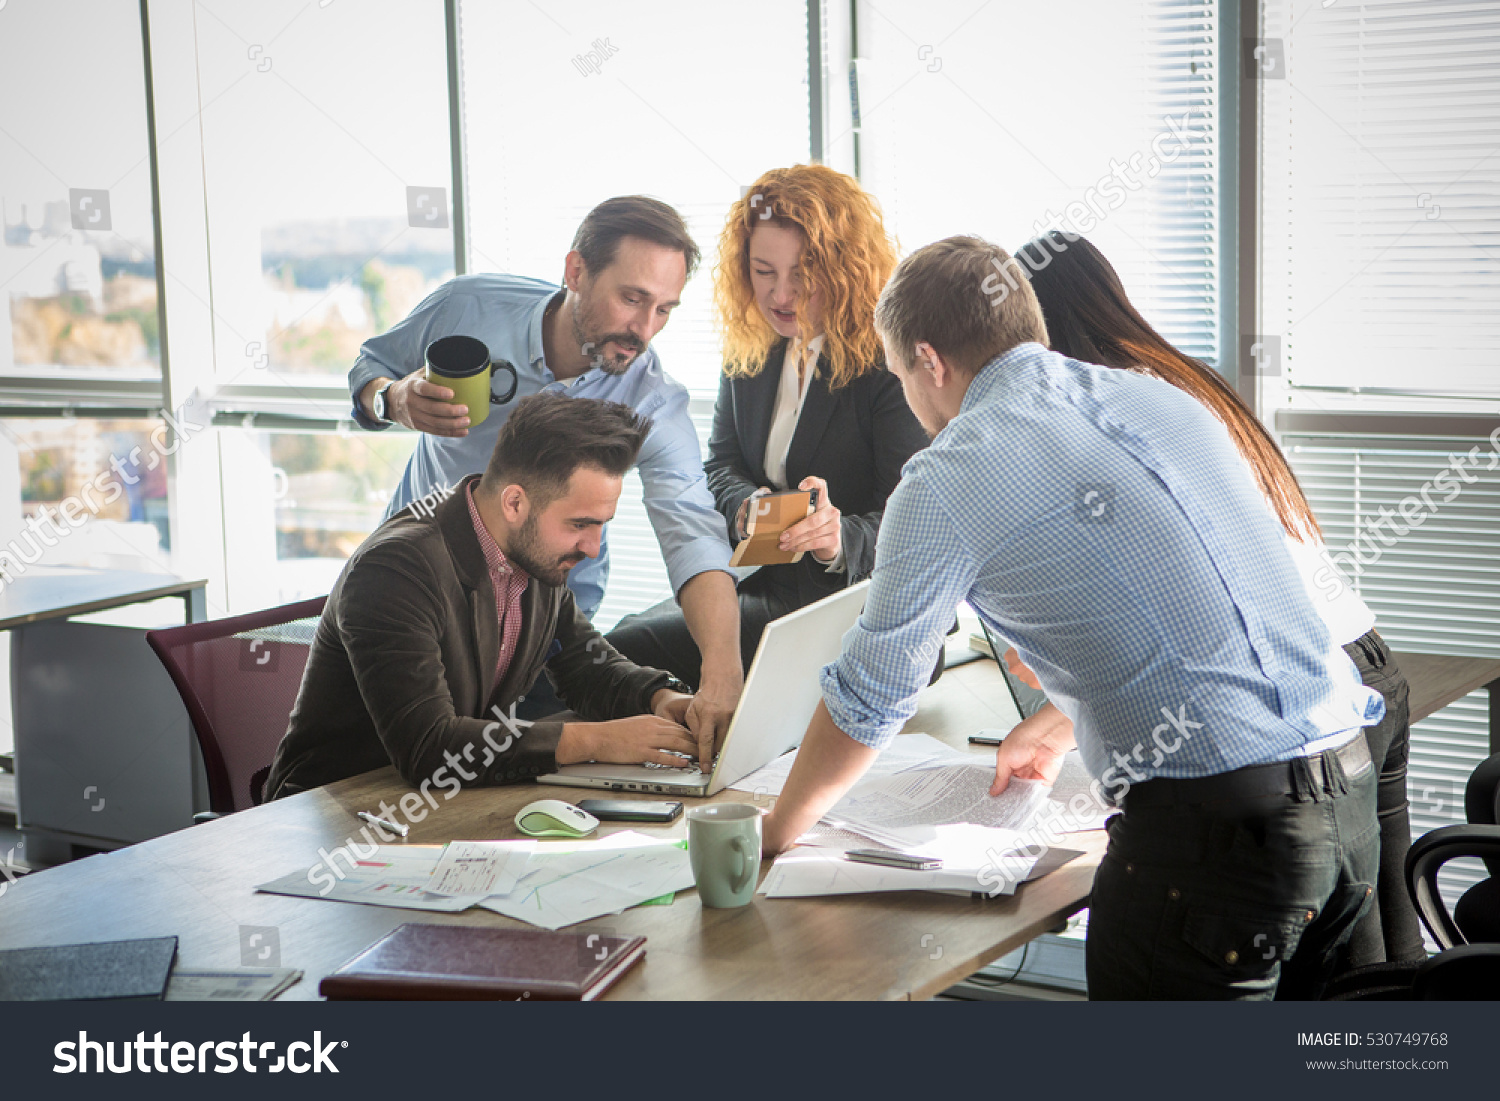 Business people showing team work while working in board room in office interior. People helping one of their colleague to finish new business plan. Business concept. Team work. #530749768